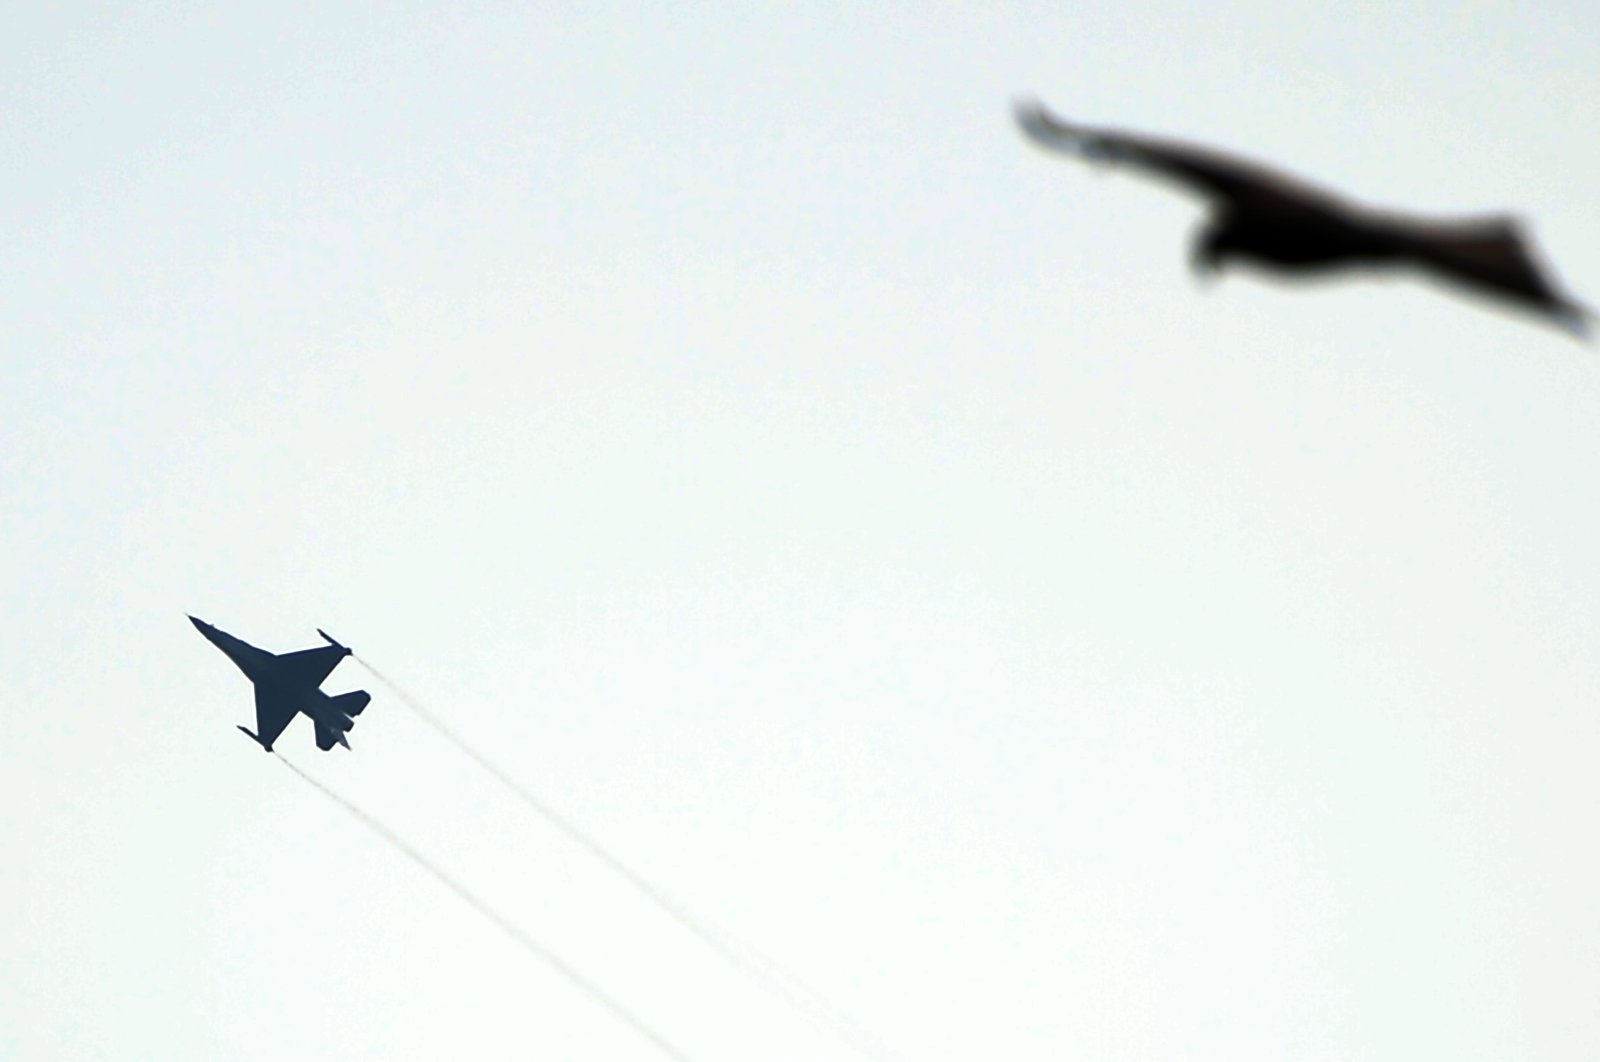 A Pakistani F-16 fighter makes a manoeuvre before crashing during a rehearsal ahead of Pakistan Day military parade in Islamabad on March 11, 2020. (AFP Photo)